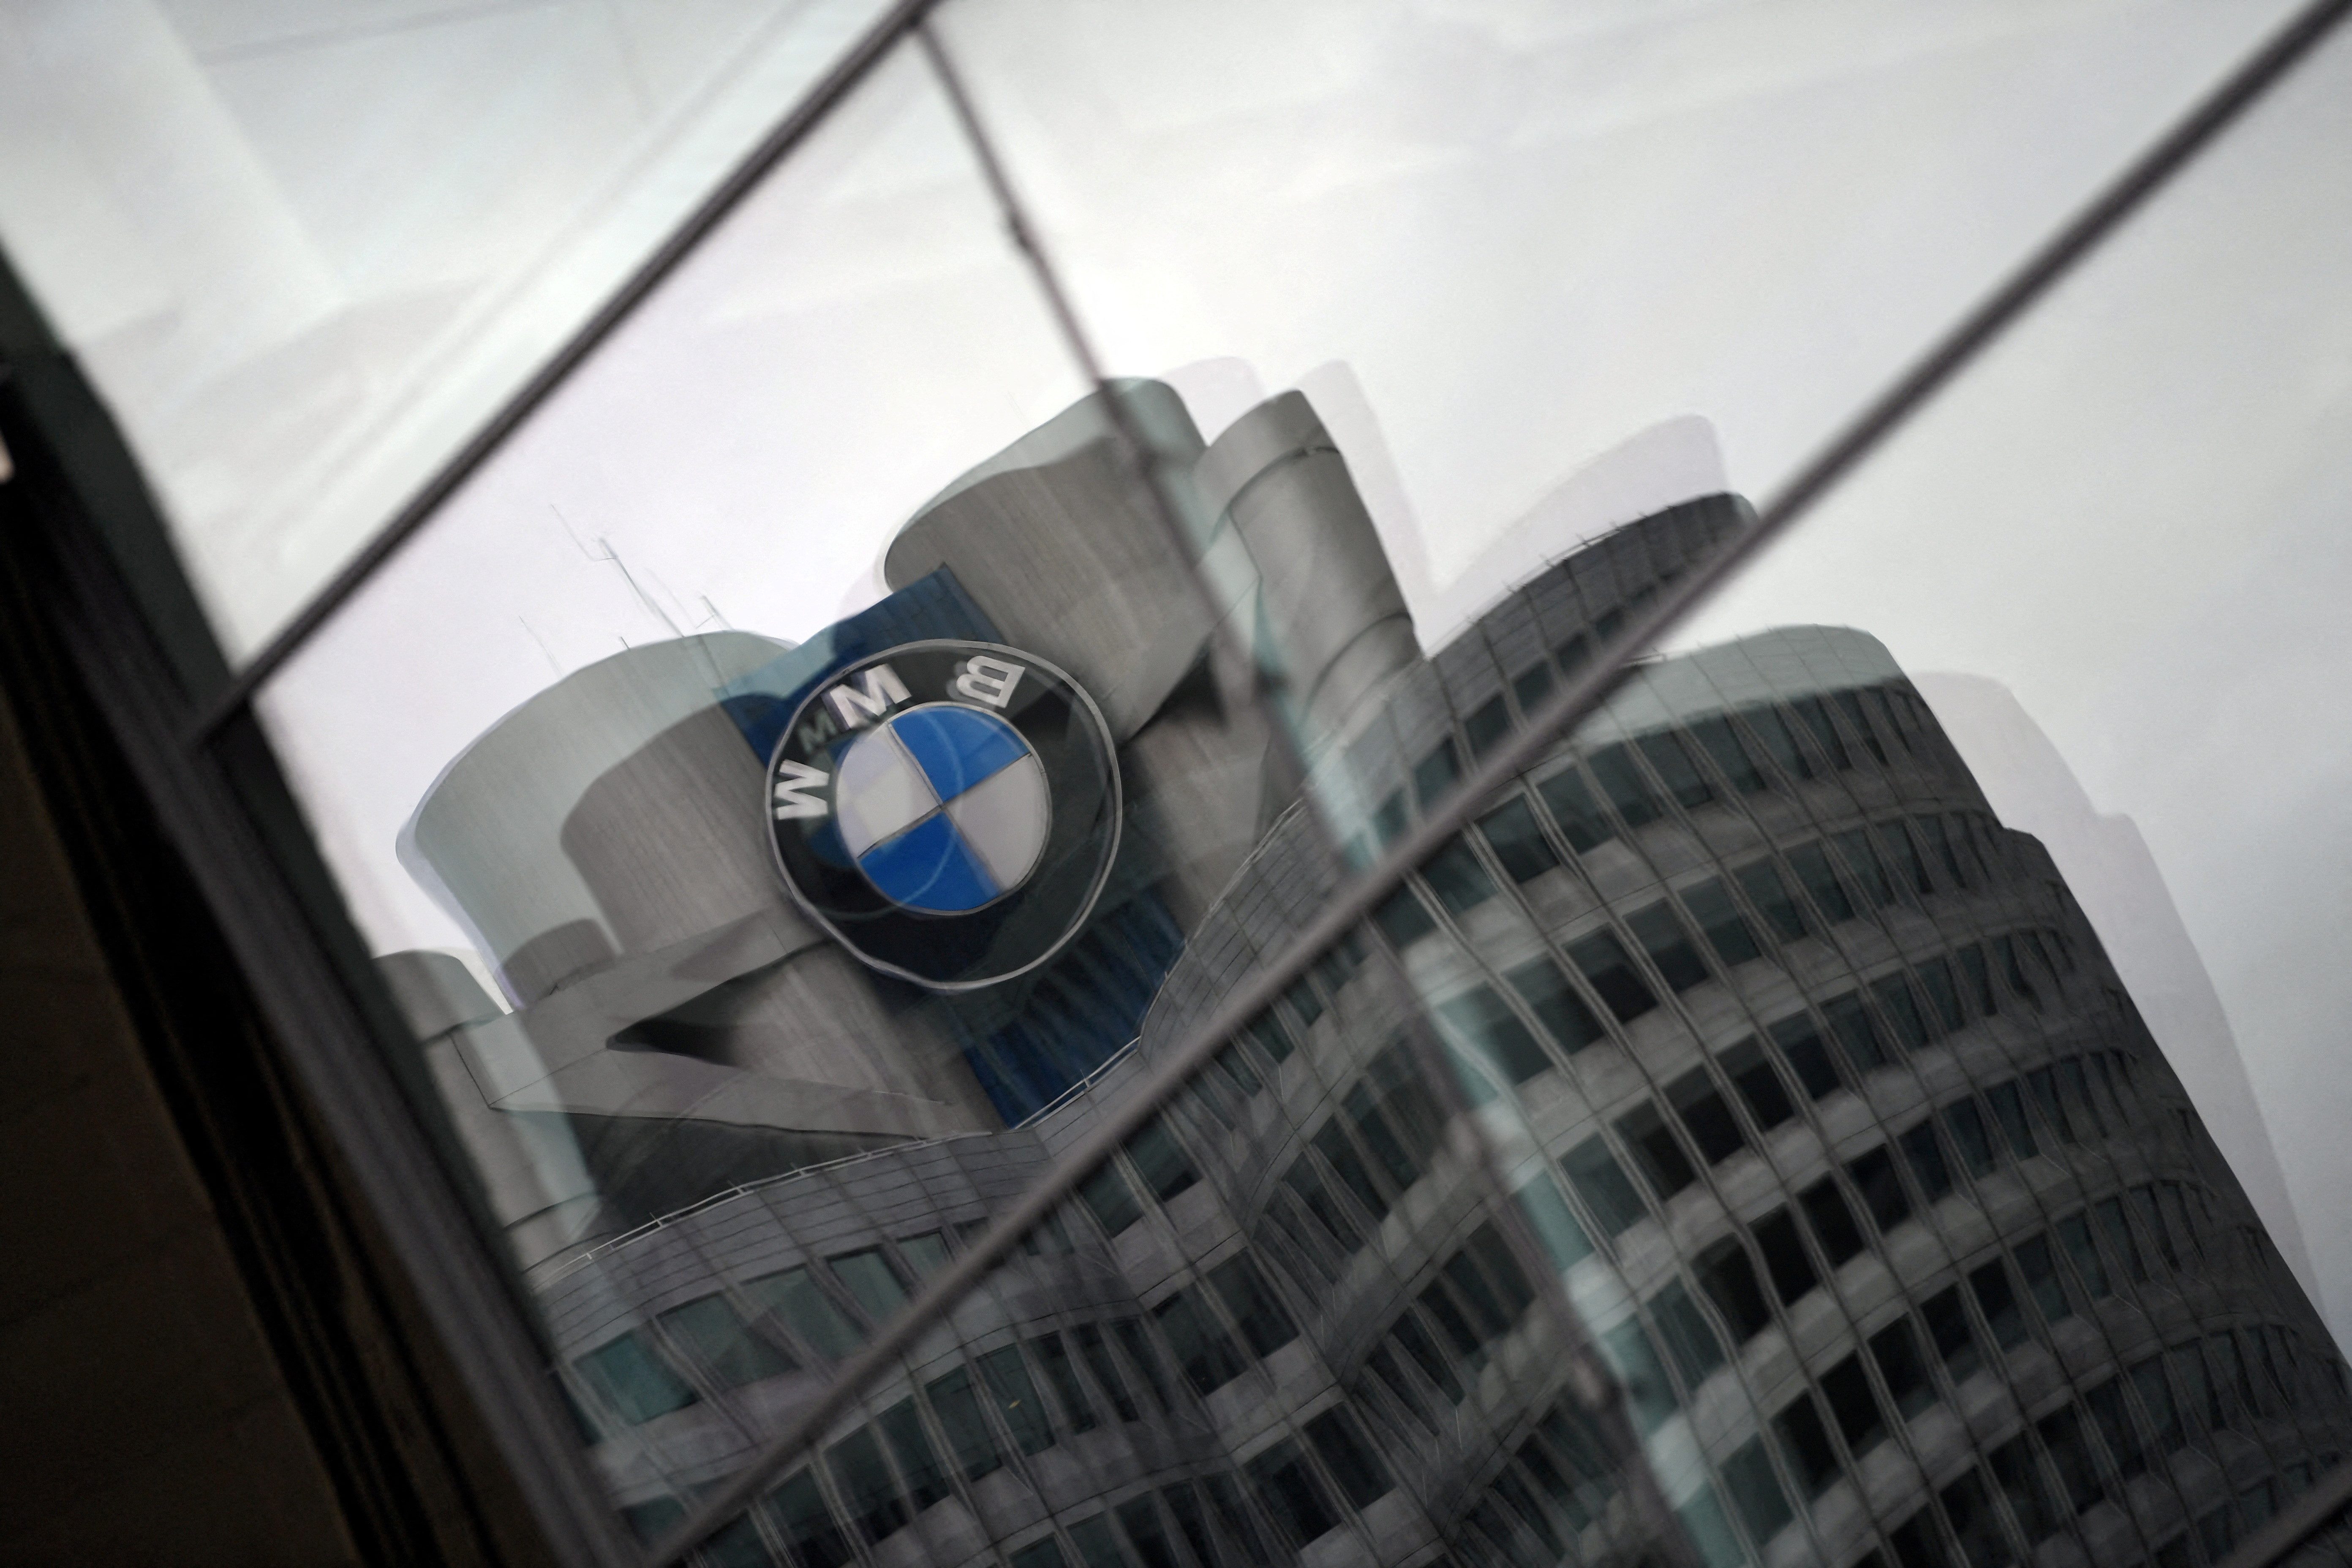 The logo of German car manufacturer BMW is seen at the company headquarters in Munich